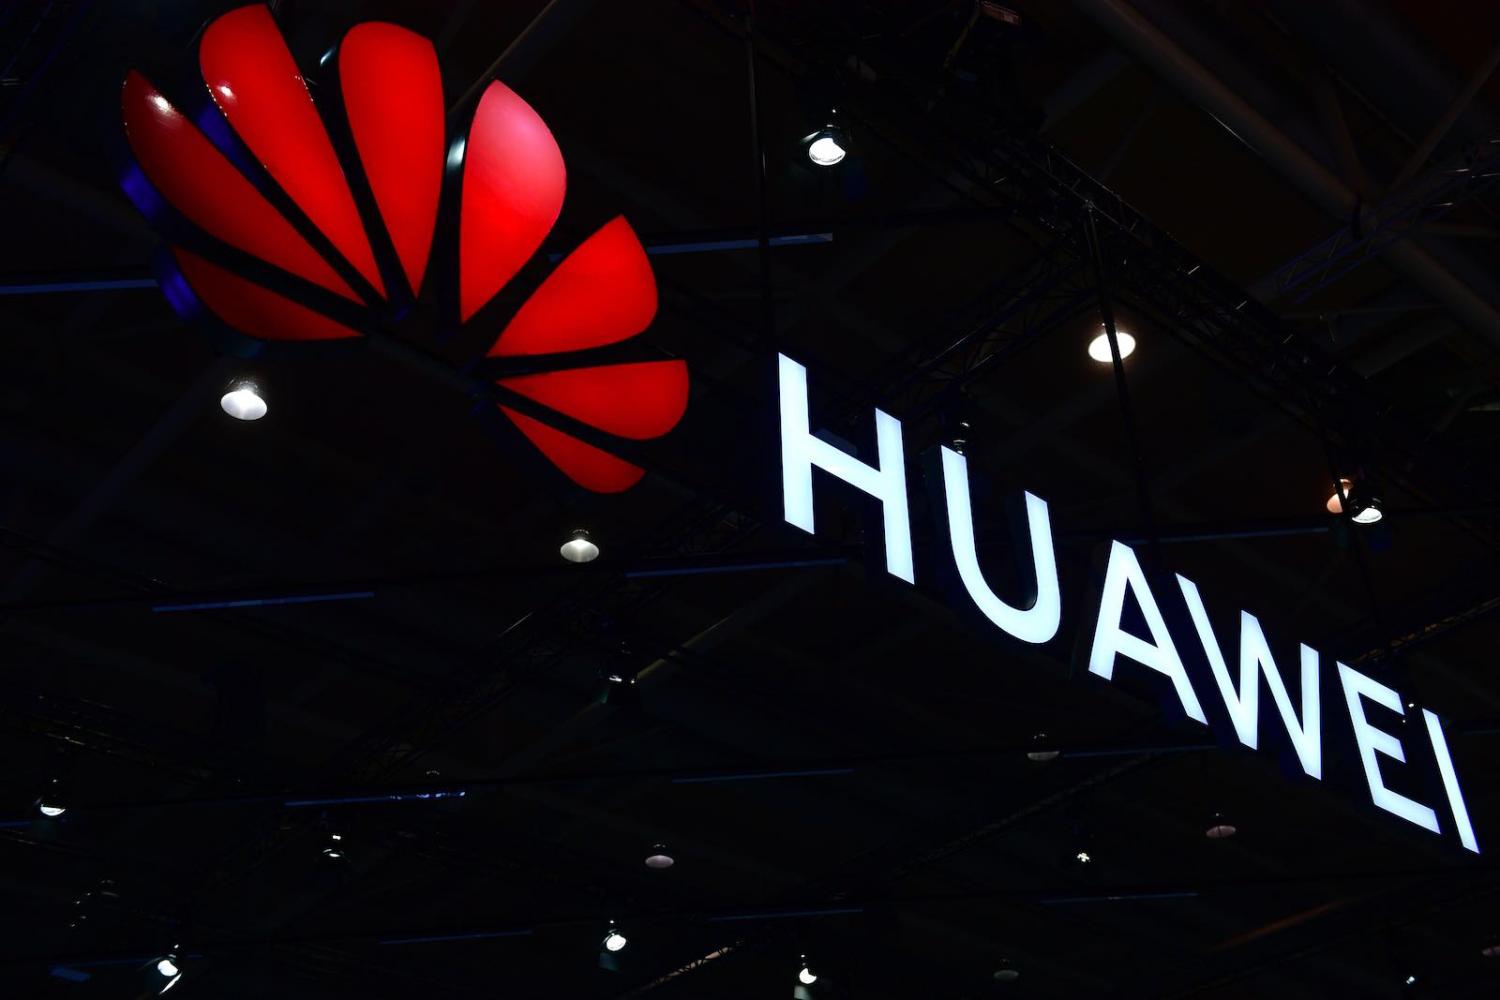 The Huawei logo displayed at the 2018 CeBIT technology trade fair on 12 June in Hanover, Germany (Photo: Alexander Koerner/Getty)